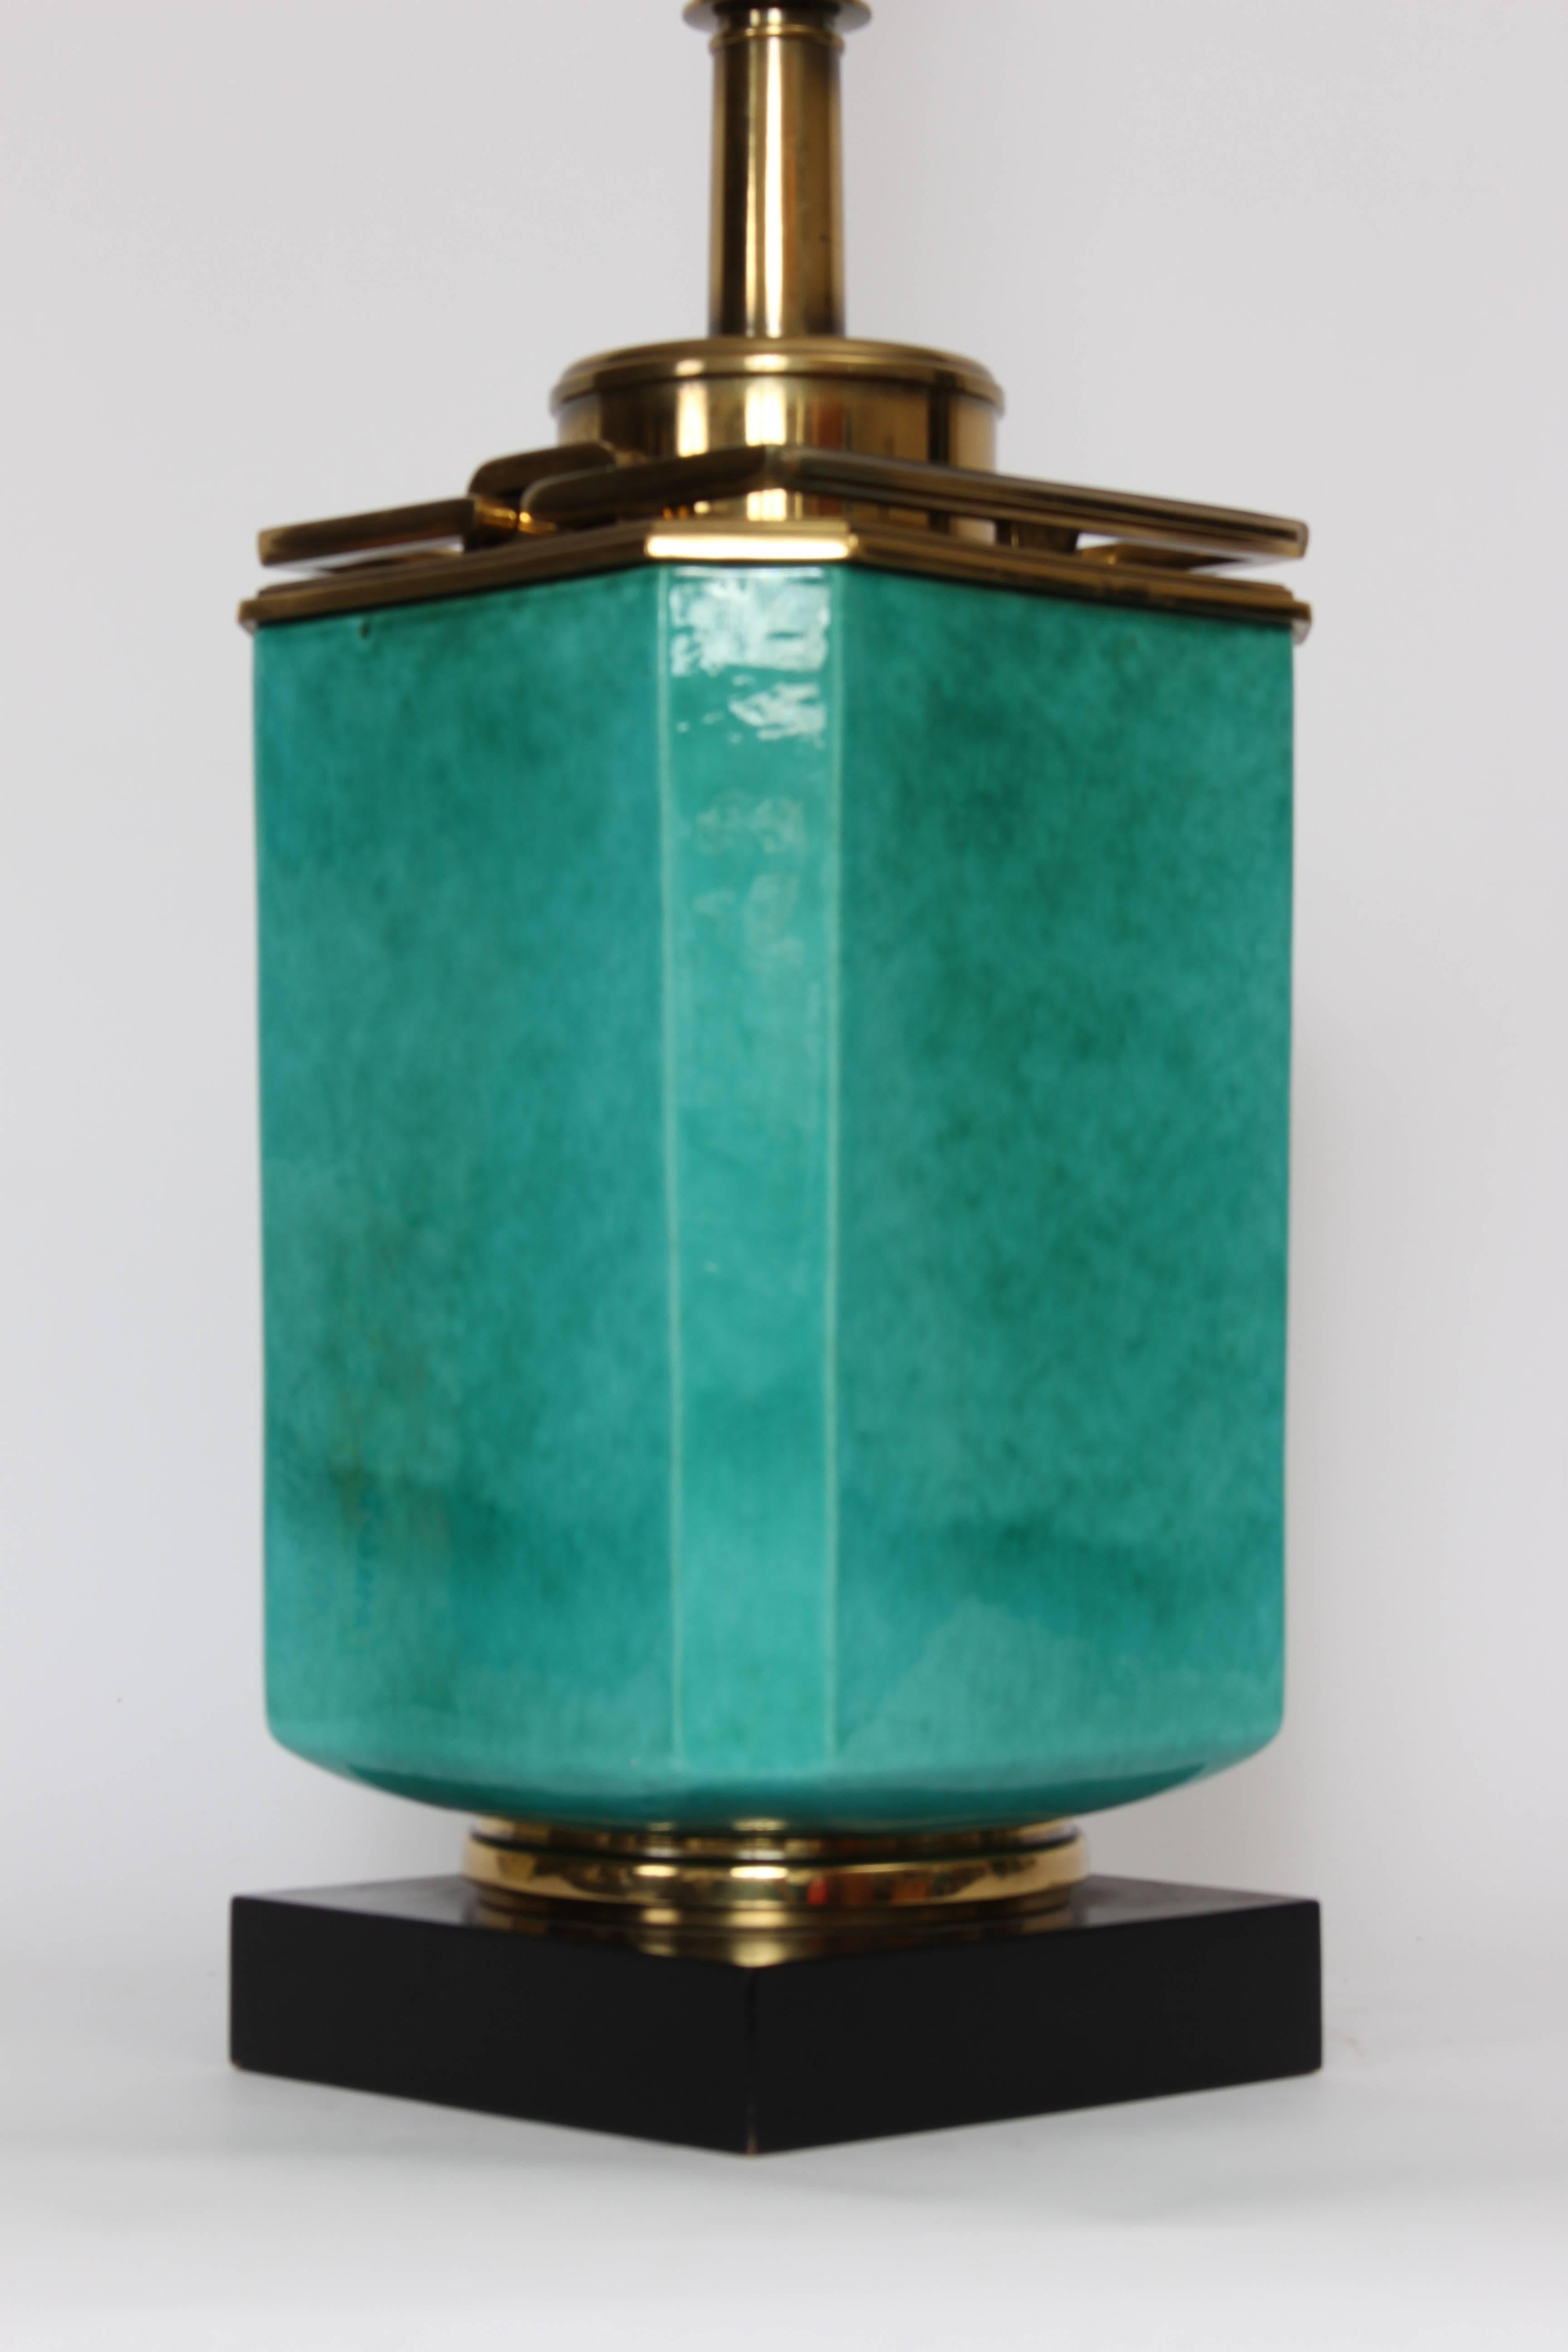 Pair of Edwin Cole for Stiffel Aqua Ceramic & Brass Table Lamp with Glass Shades In Good Condition For Sale In Bainbridge, NY